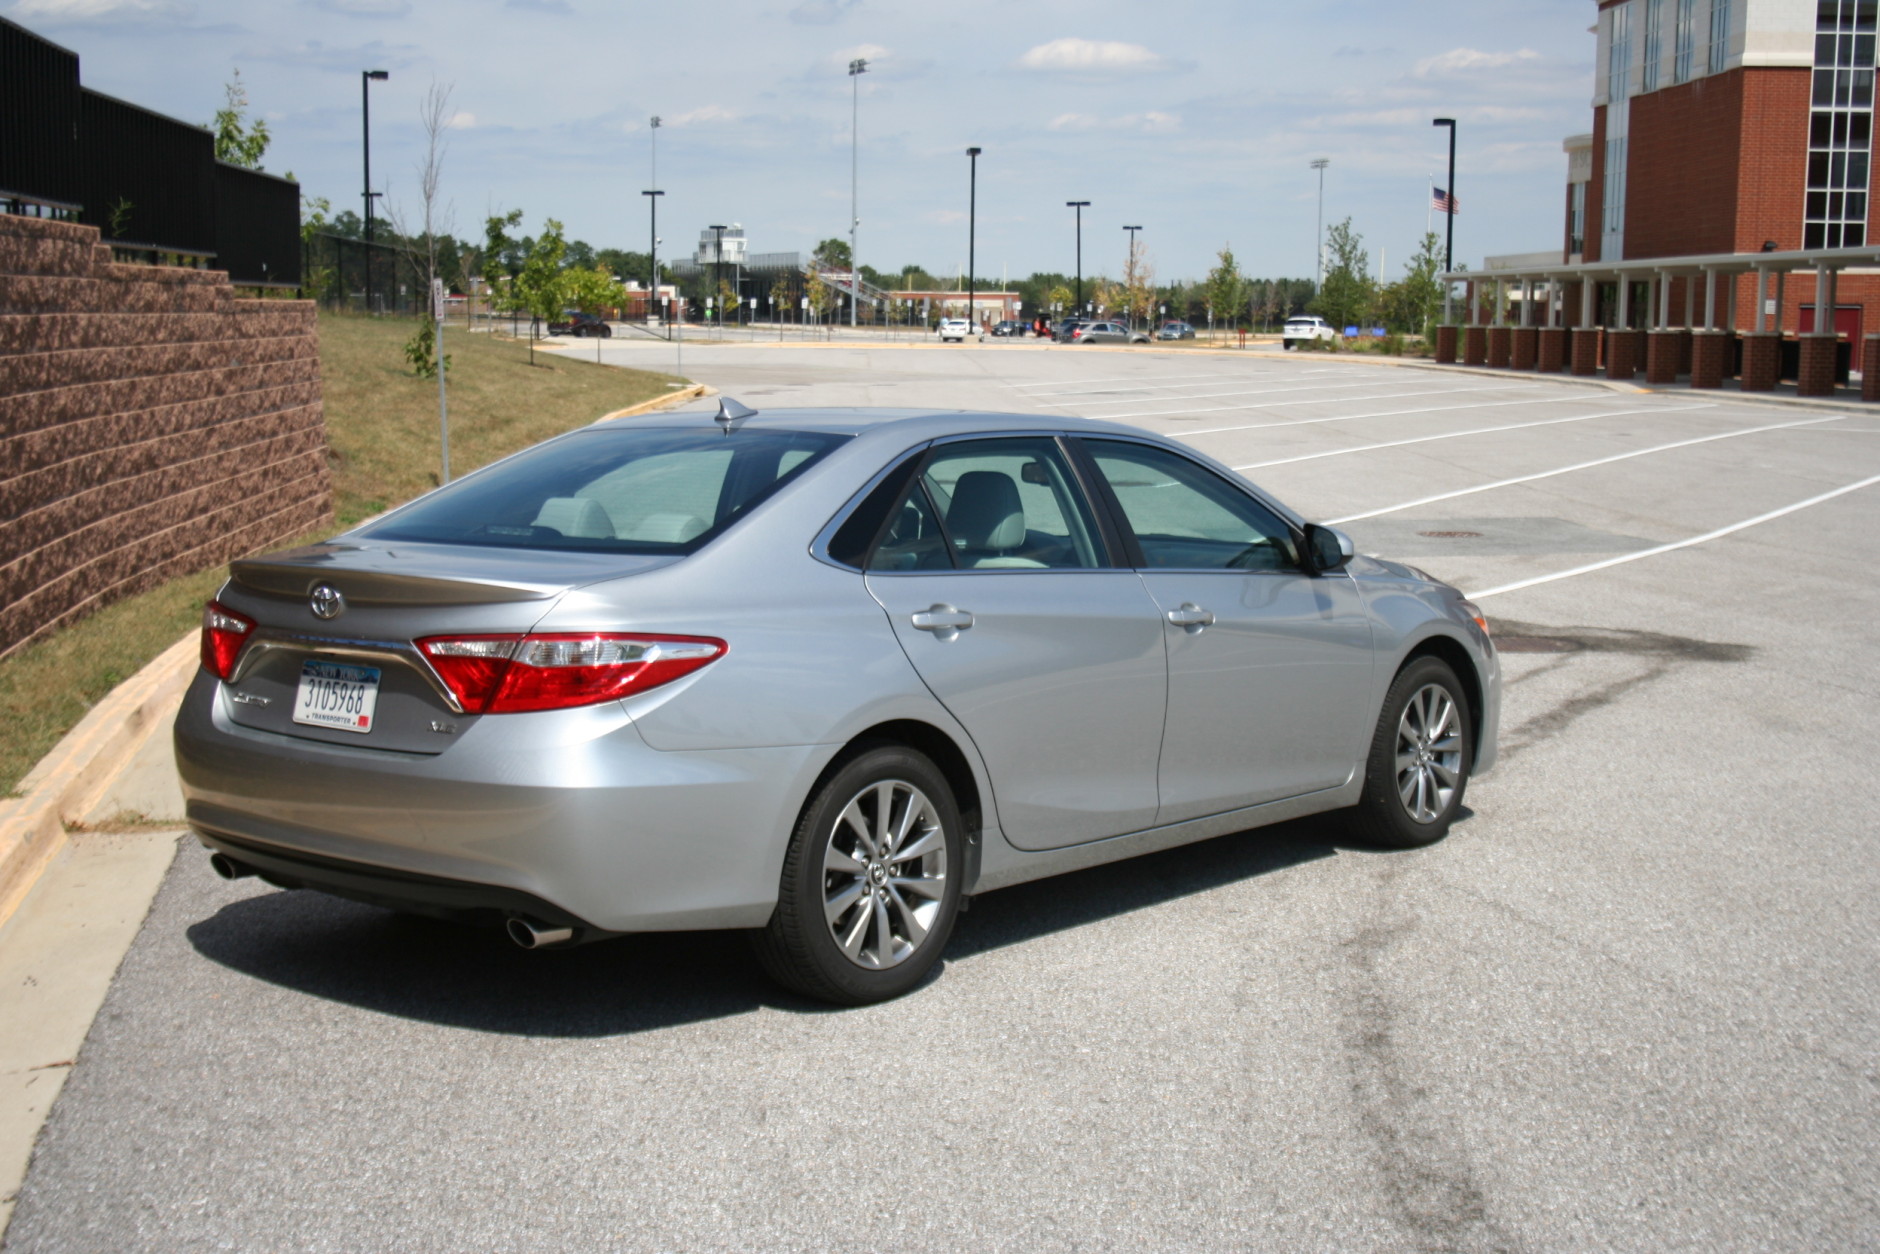 WTOP's Mike Parris says the Toyota Camry might not be the most exciting vehicle on the road, but it does what you ask of it with good reliability. (WTOP/Mike Parris)